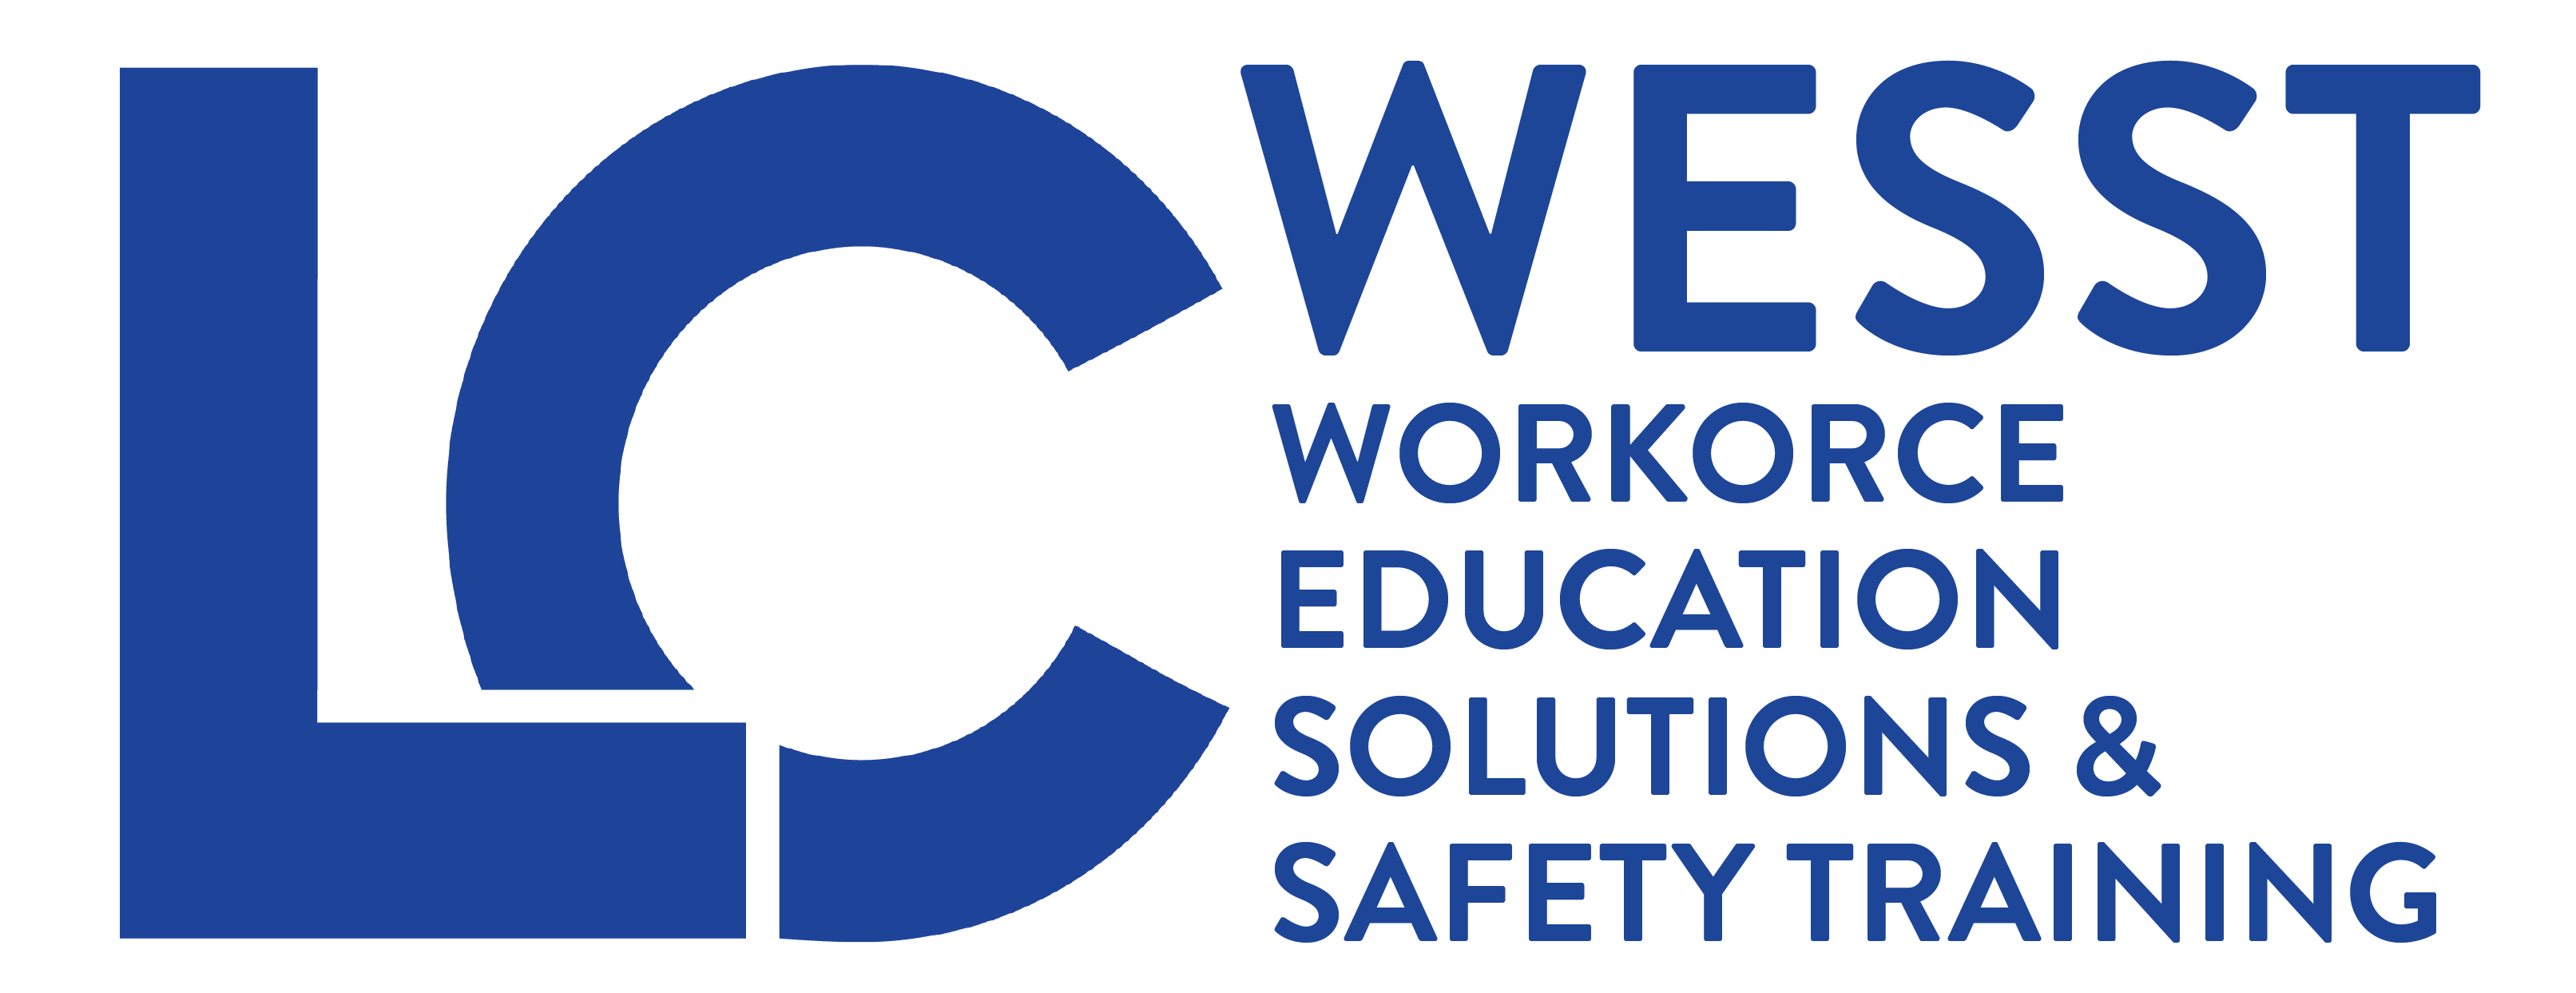 Workforce Education, Solutions & Safety Training